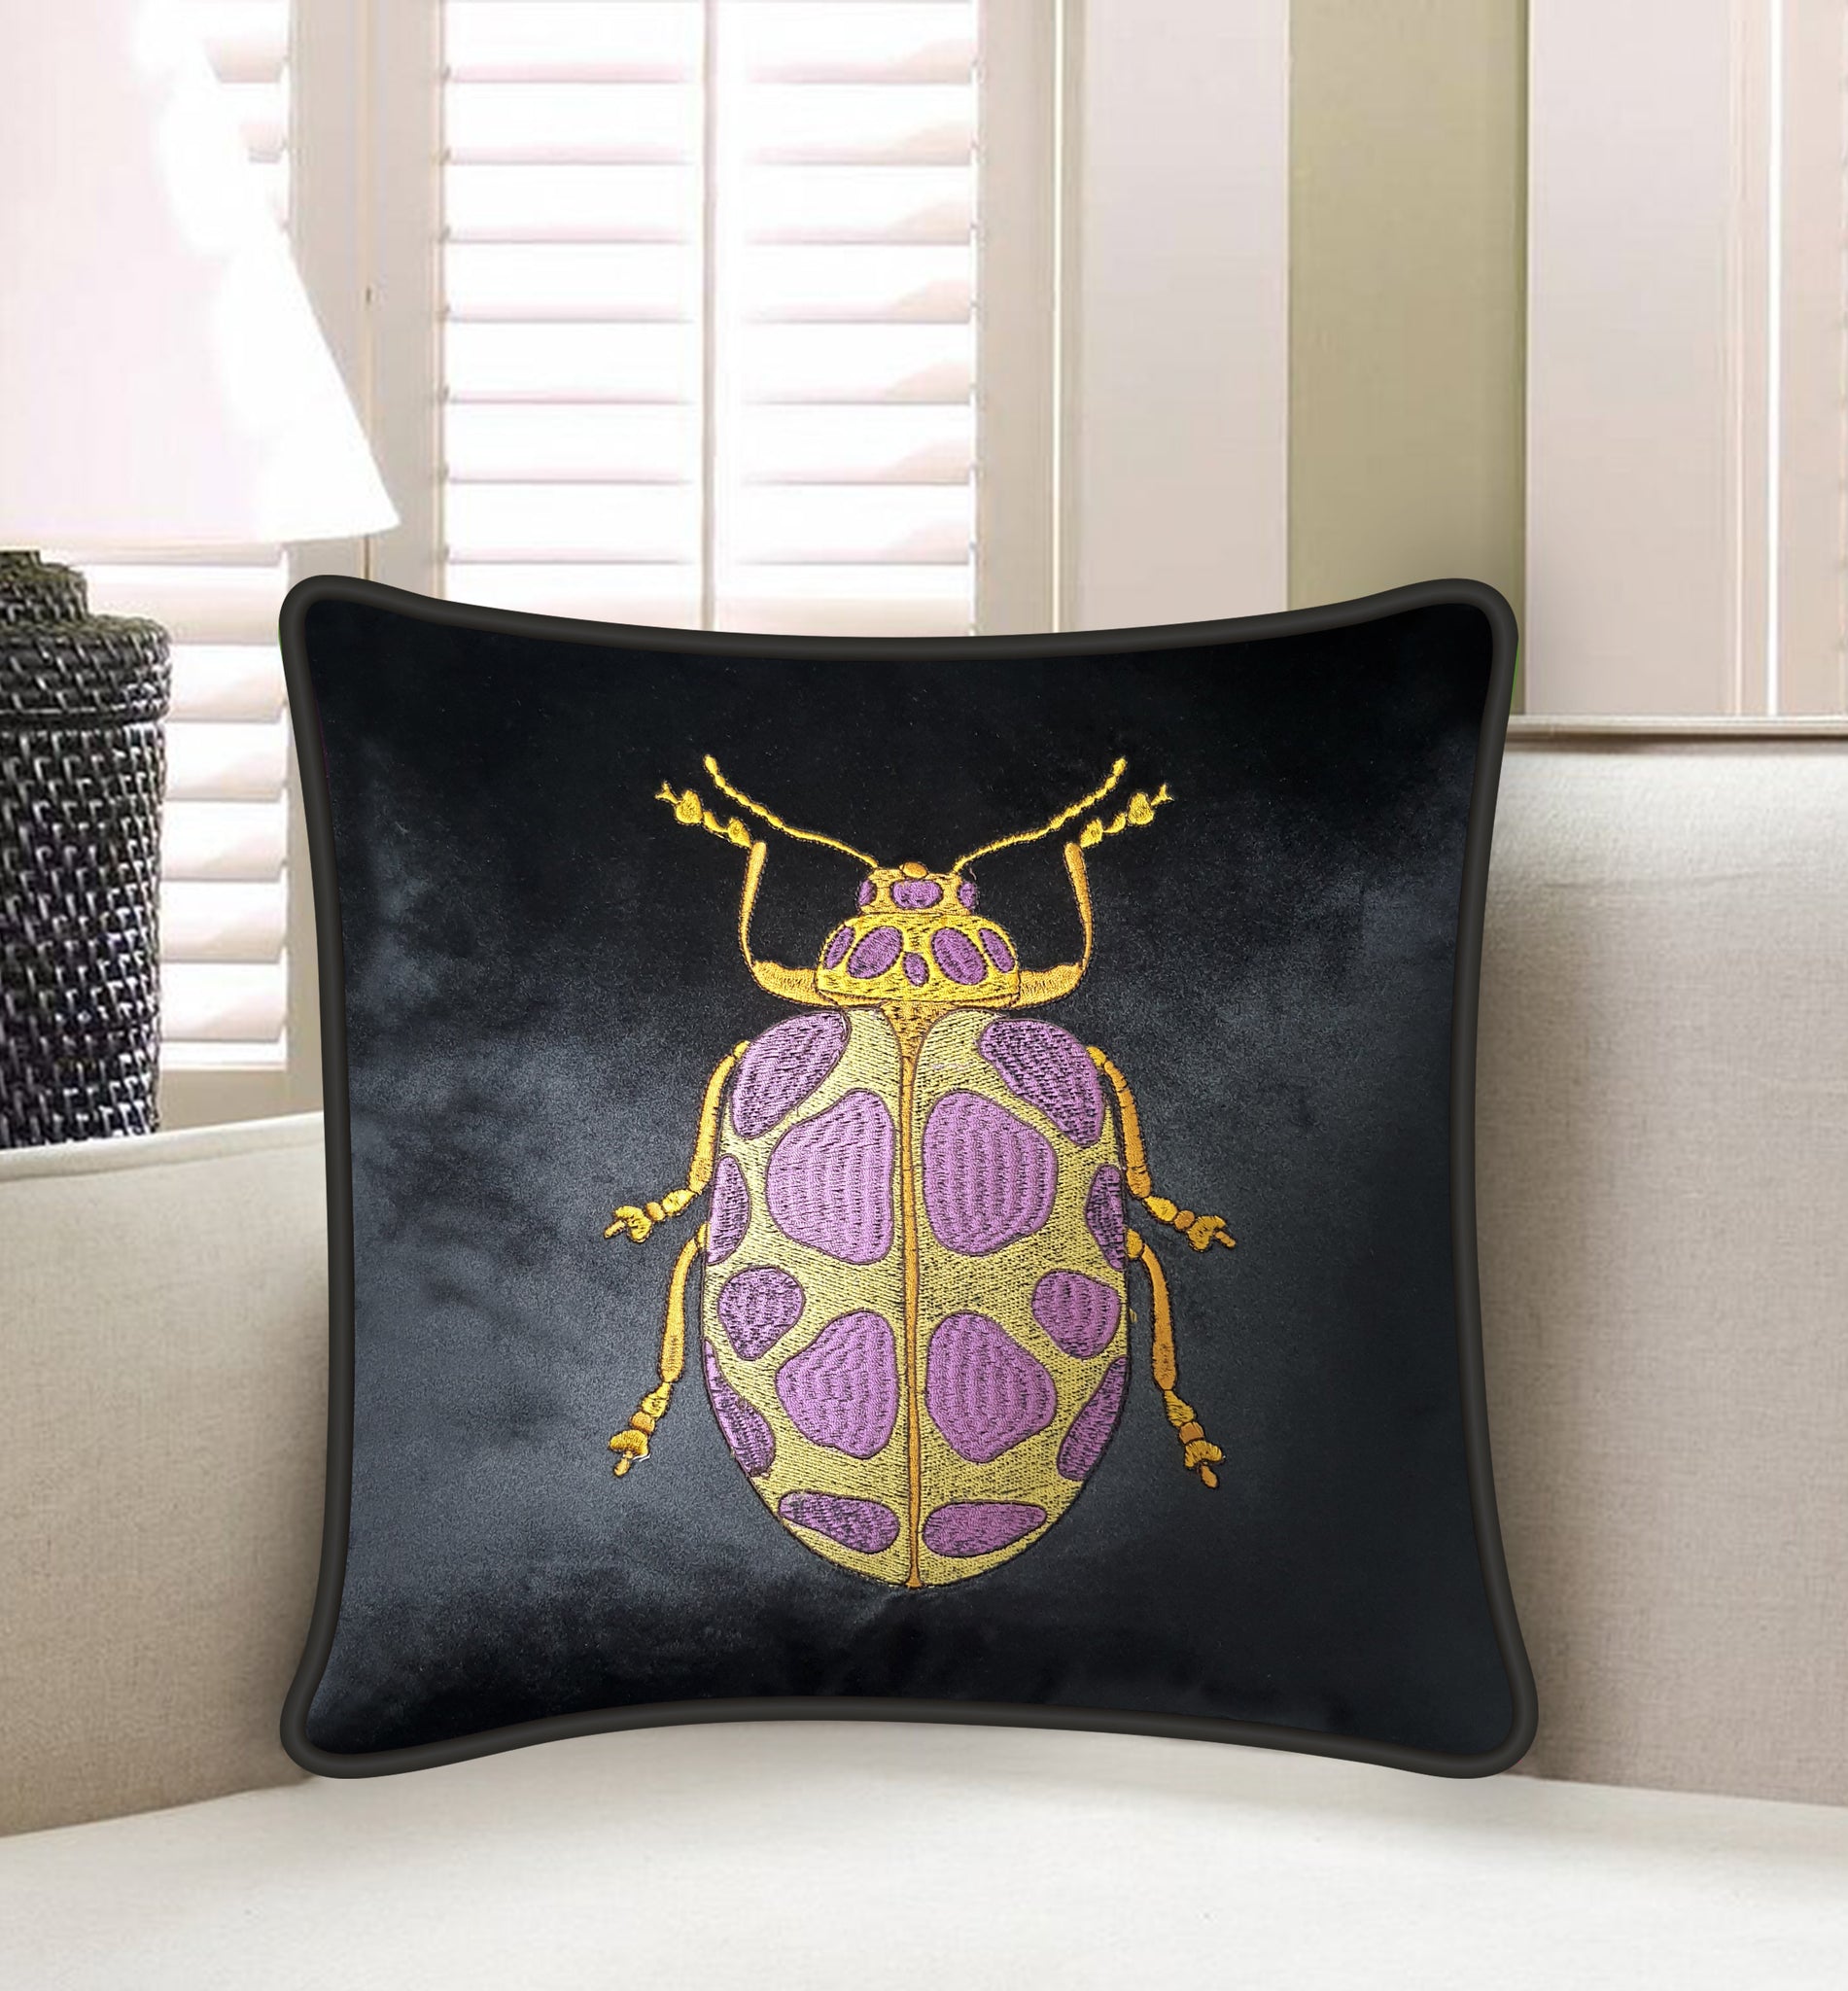  Velvet Cushion Cover Colorful Beetle Embroidery Decorative Pillowcase Modern Home Decor Throw Pillow for Sofa Chair Living Room 45x45 cm 